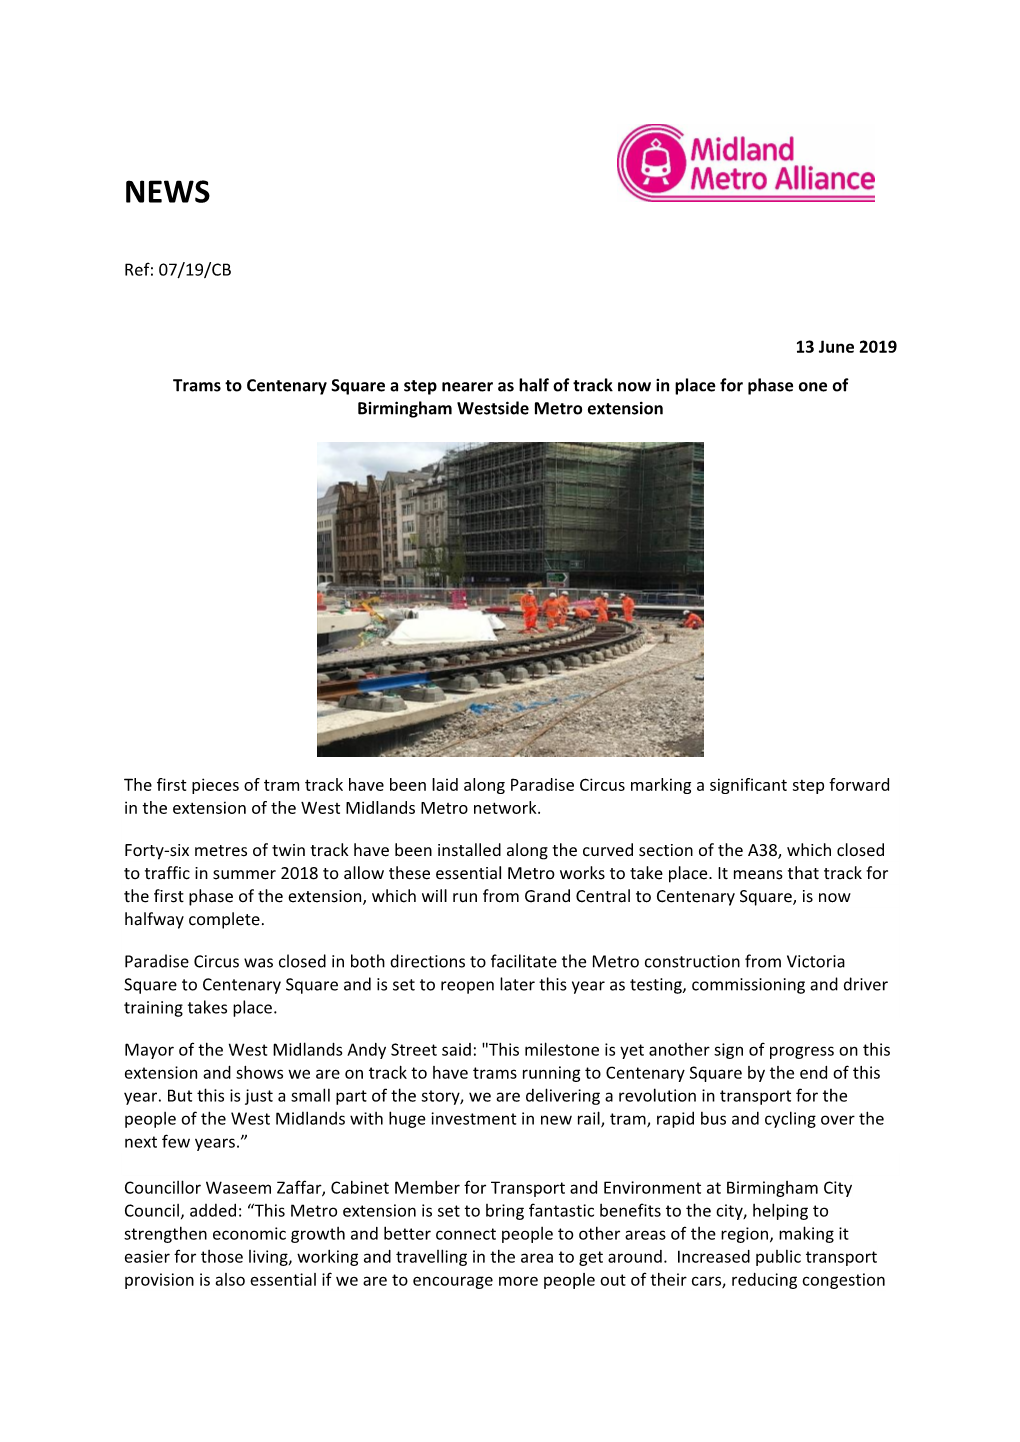 07/19/CB 13 June 2019 Trams to Centenary Square a Step Nearer As Half of Track Now in Place for Phase One of Birmingham